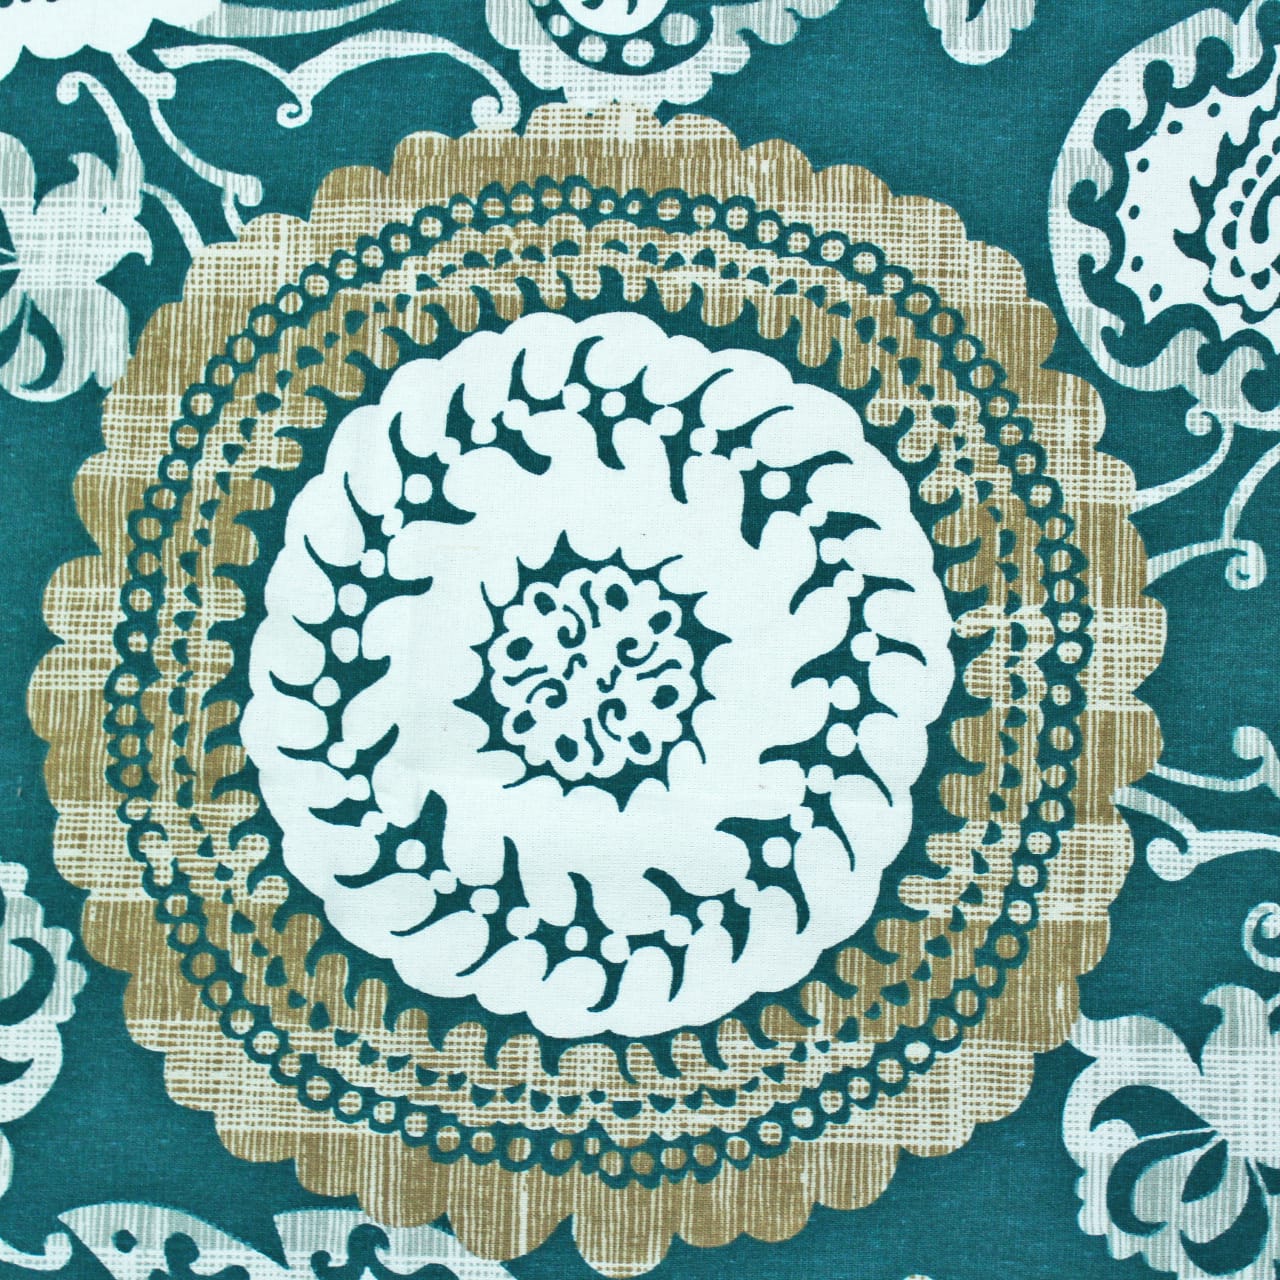 Alpha Green Woven Cotton Floral Table Cover(1 Pc) online in India